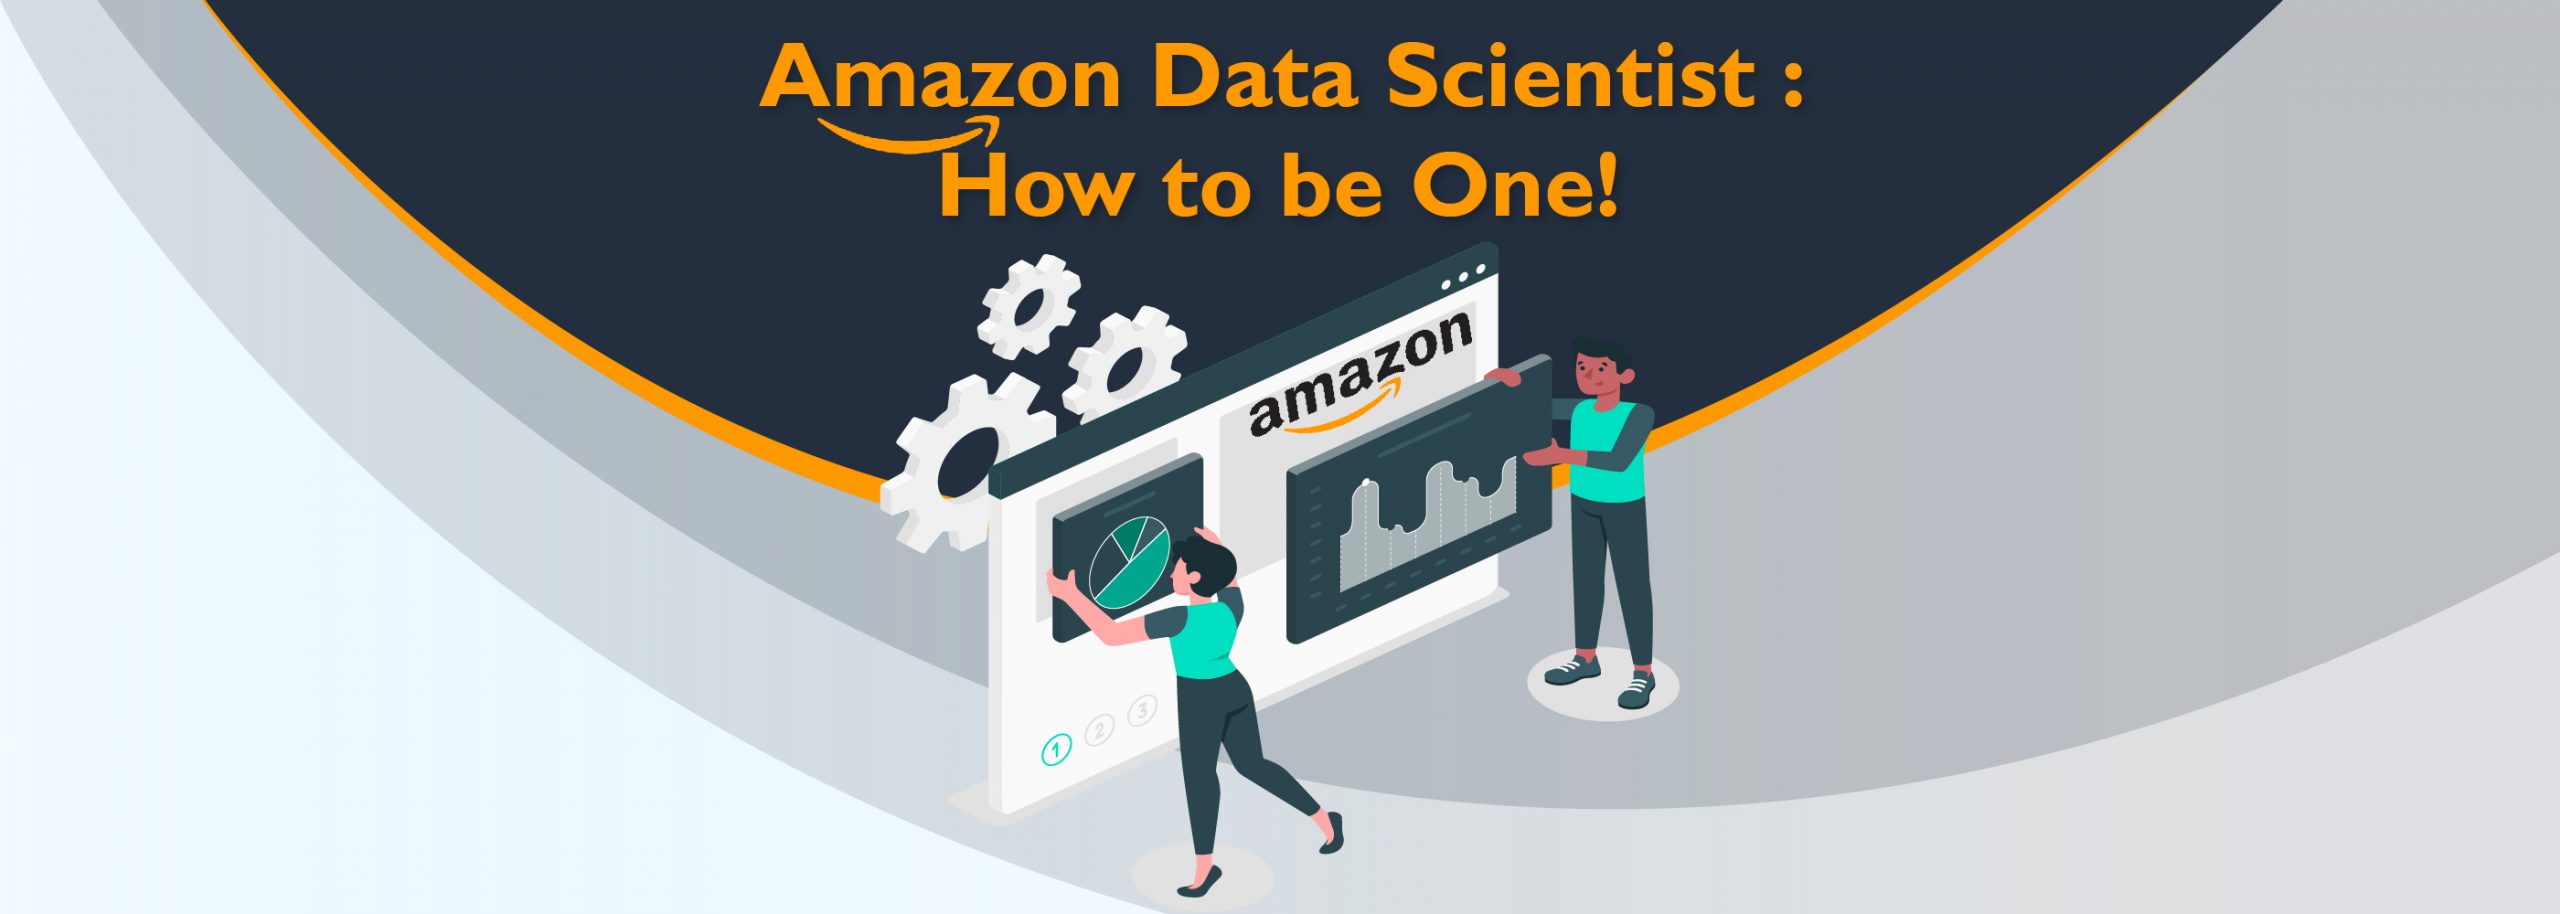 Amazon Data Scientist : 6 Excellent Ways to become One | DataTrained